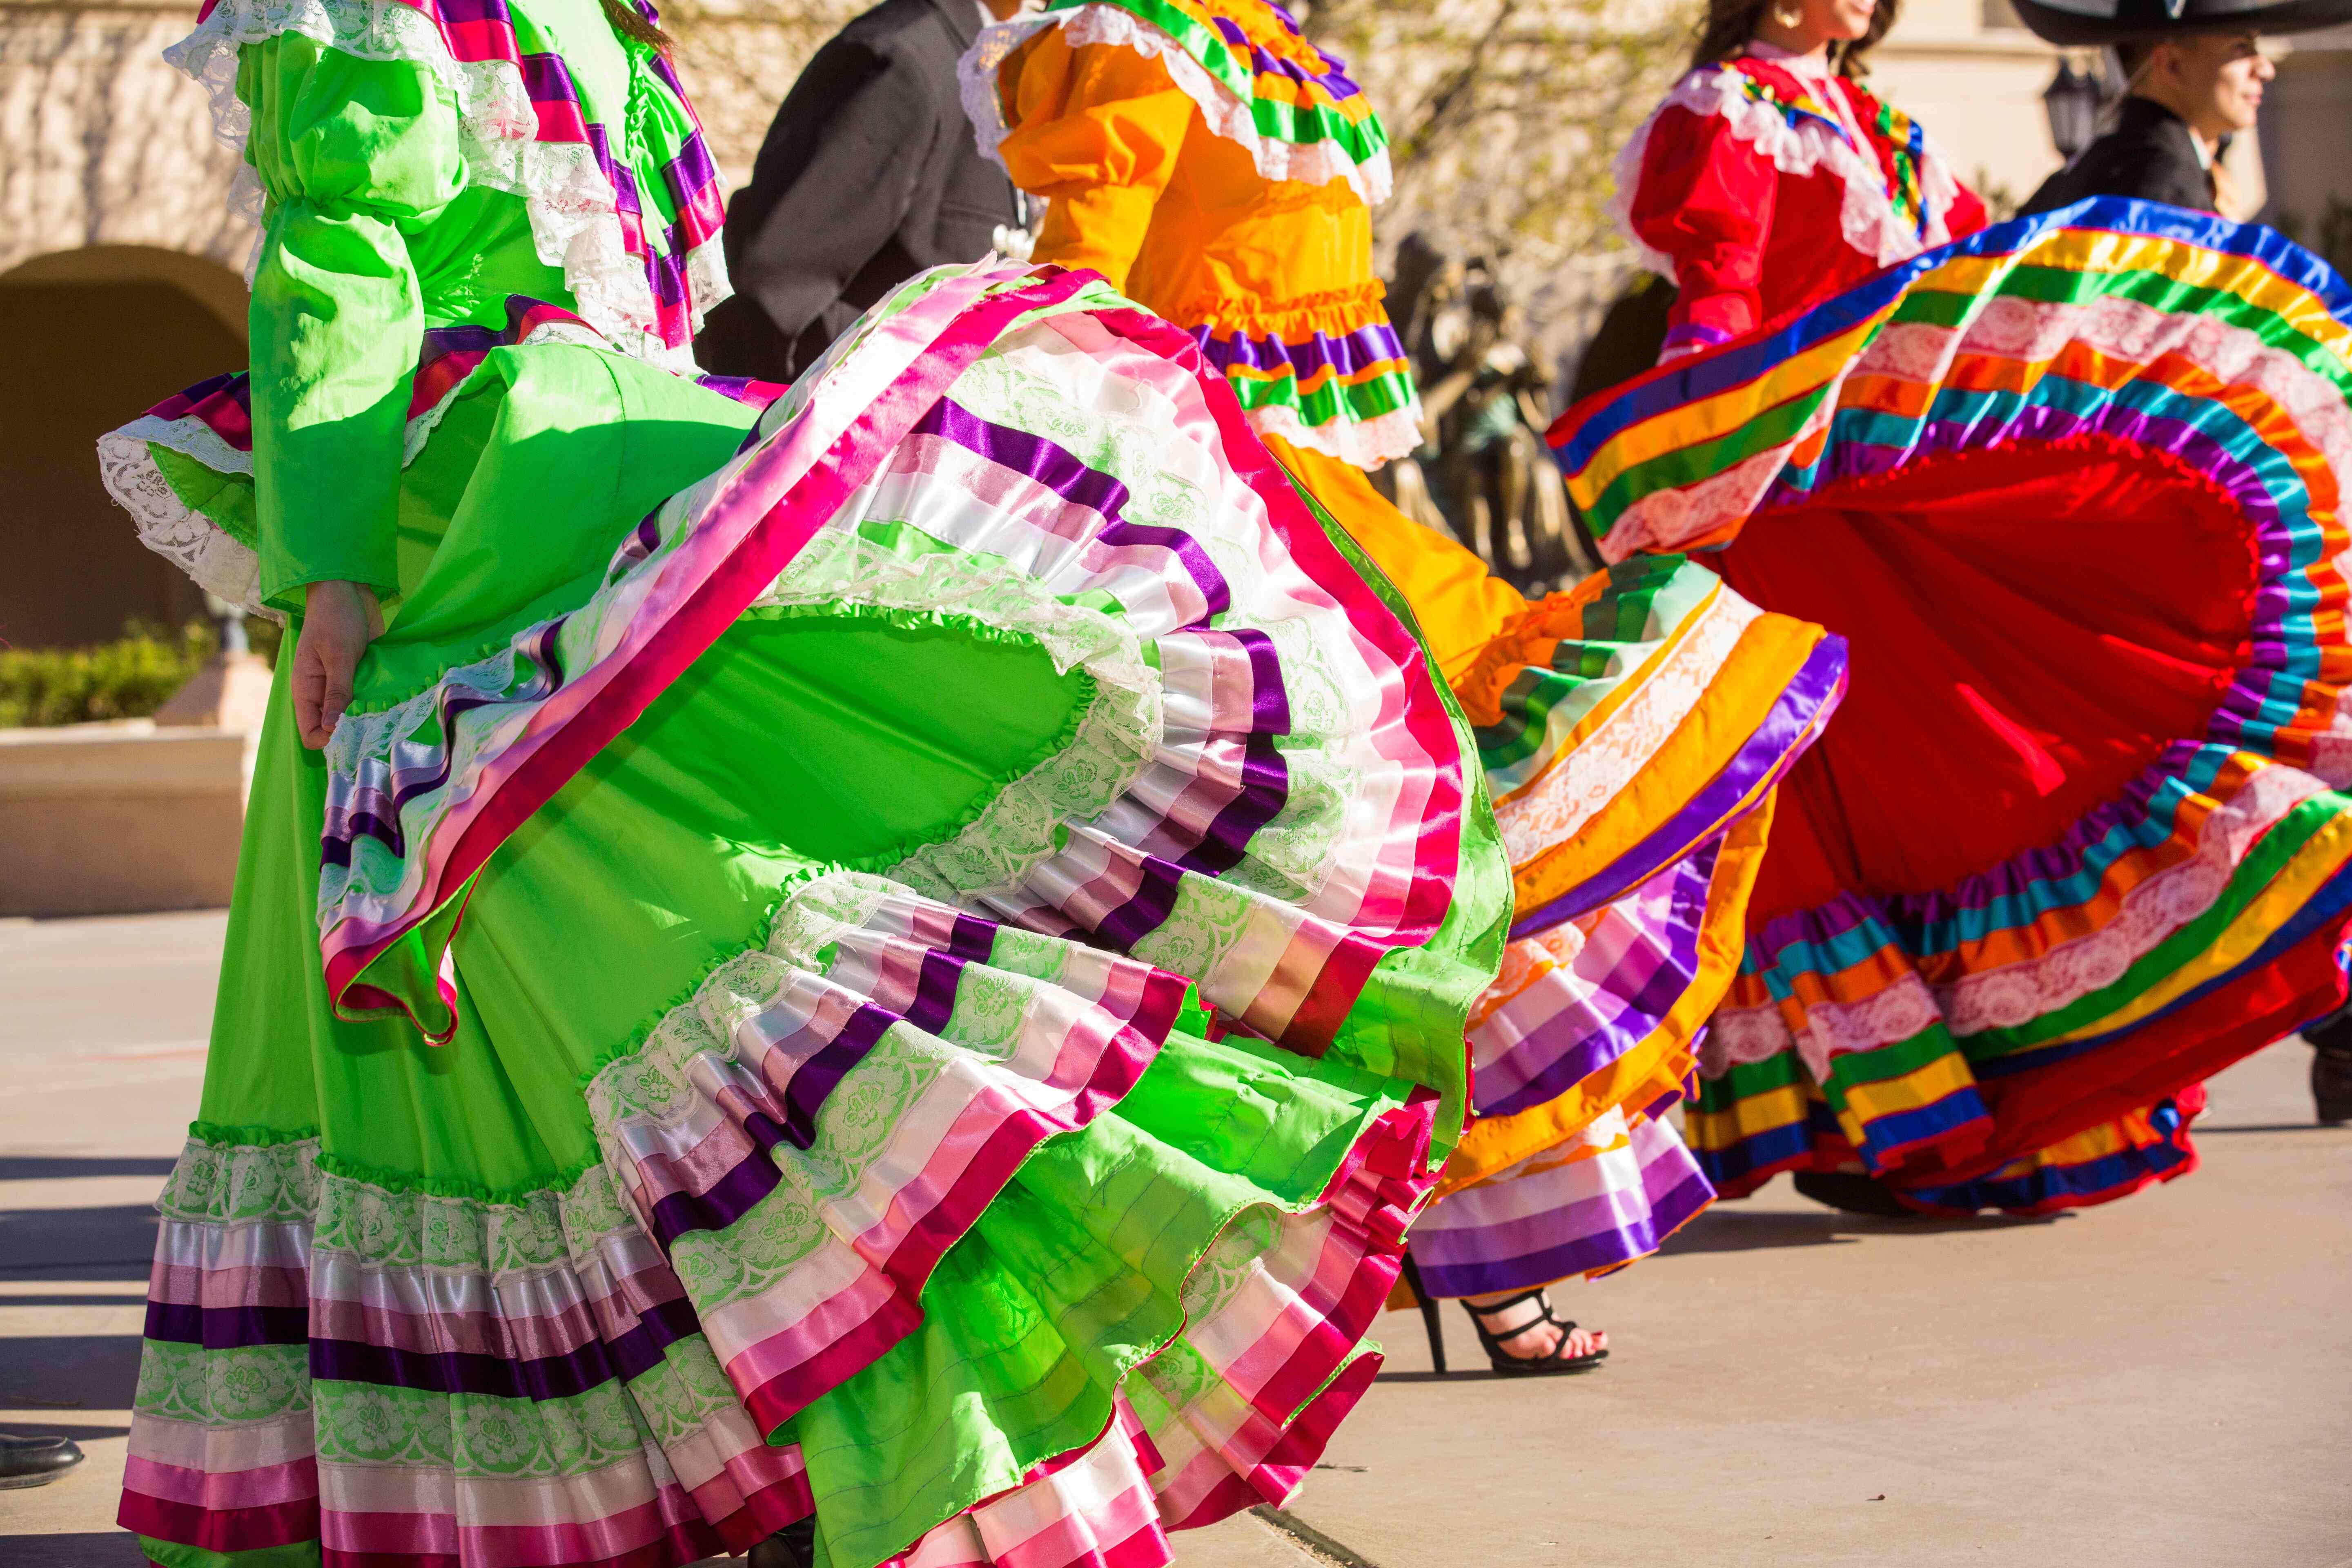 Mexican festivities with brightly colored dresses and lively dancing